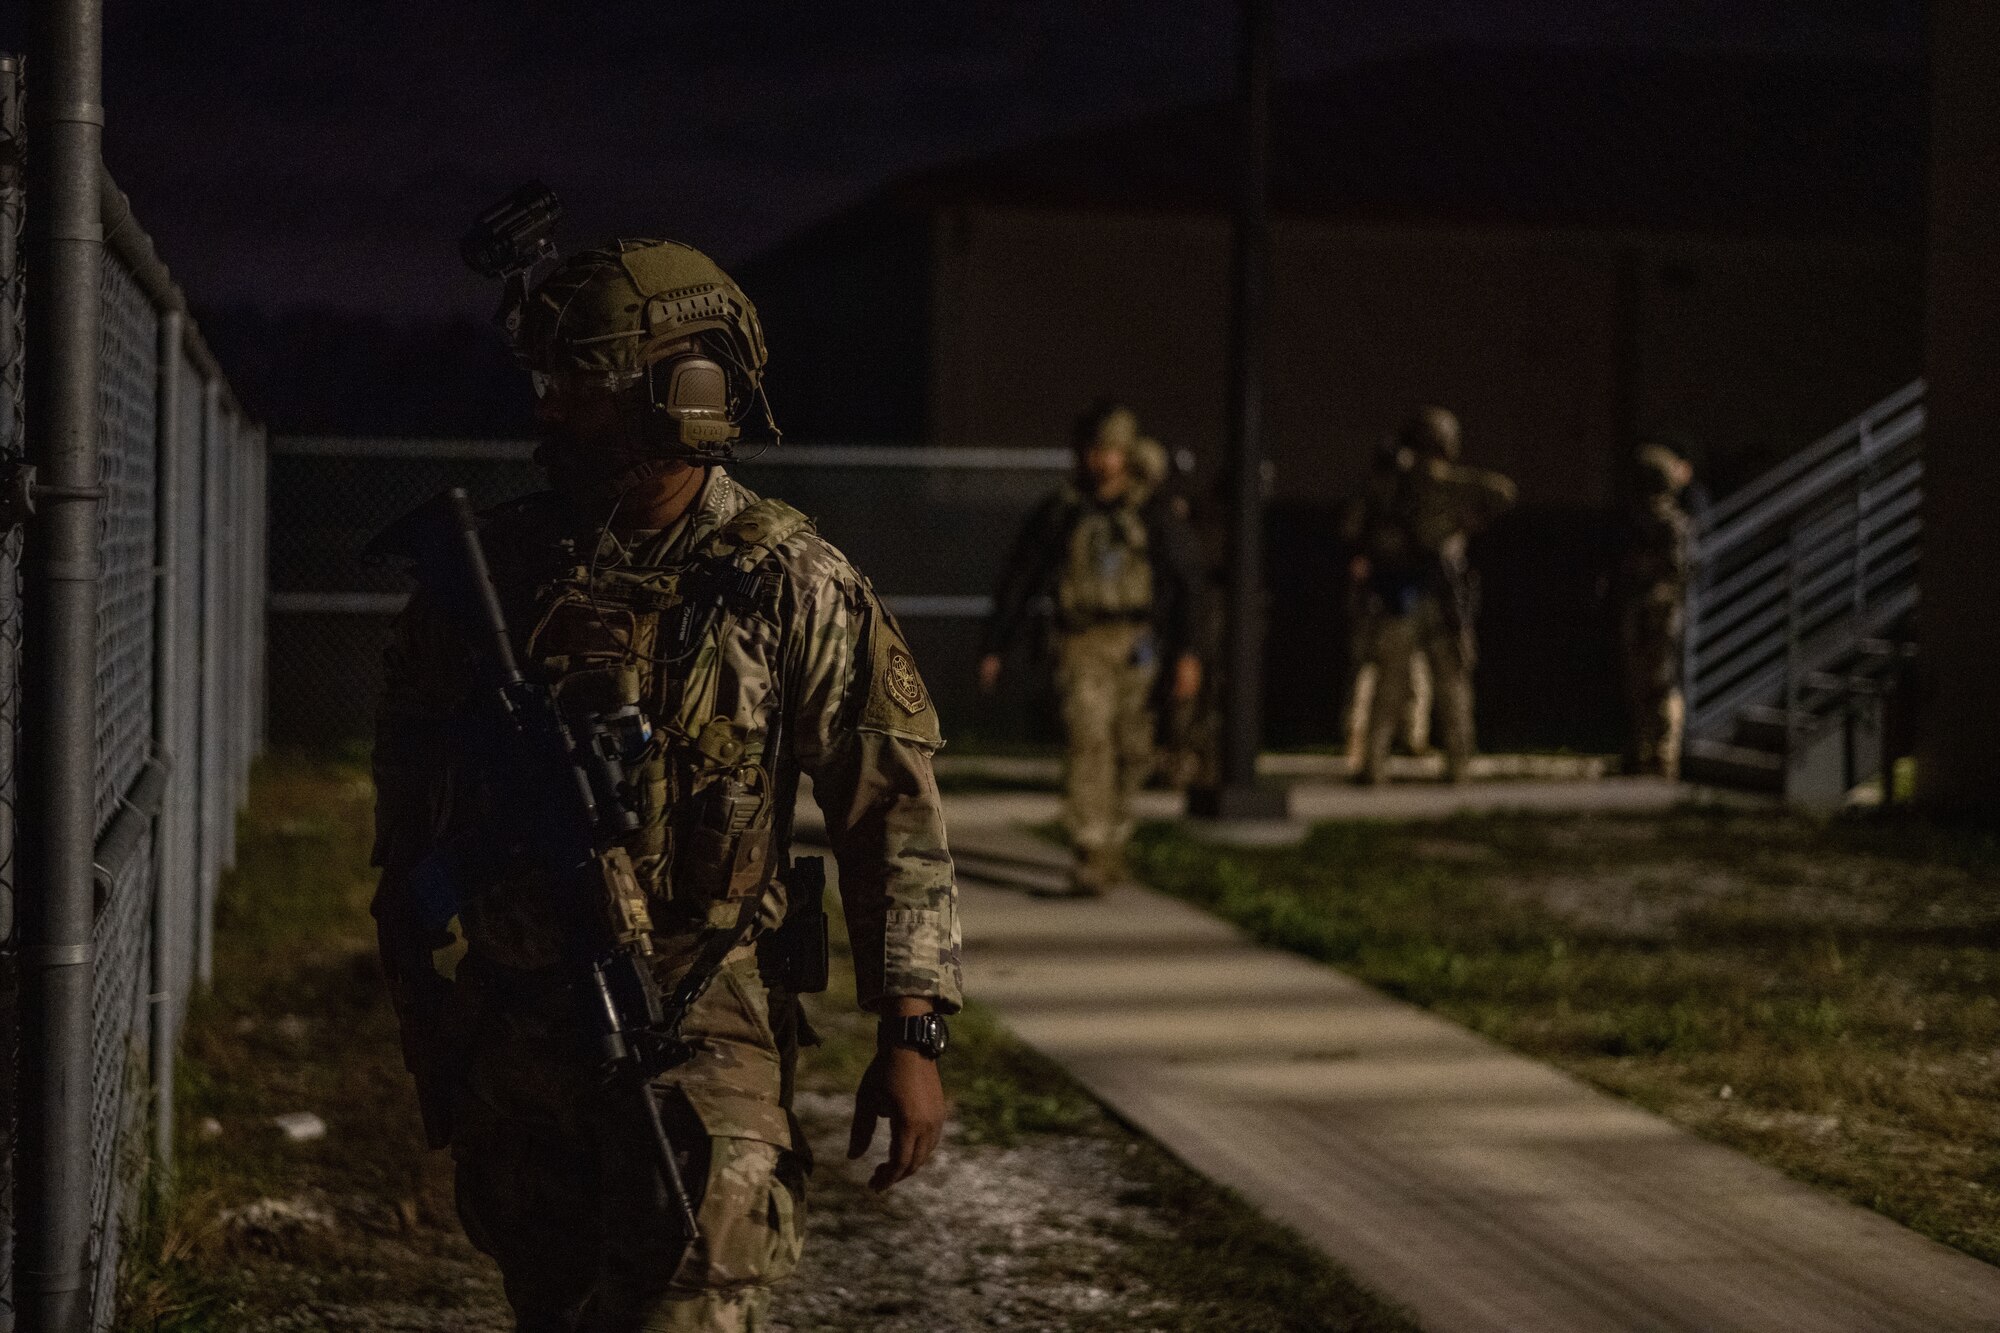 EST Airmen are highly trained and equipped to mitigate special threats which can involve barricaded suspects, hostages and active shooters. (U.S. Air Force photo by Airman 1st Class Zachary Foster)